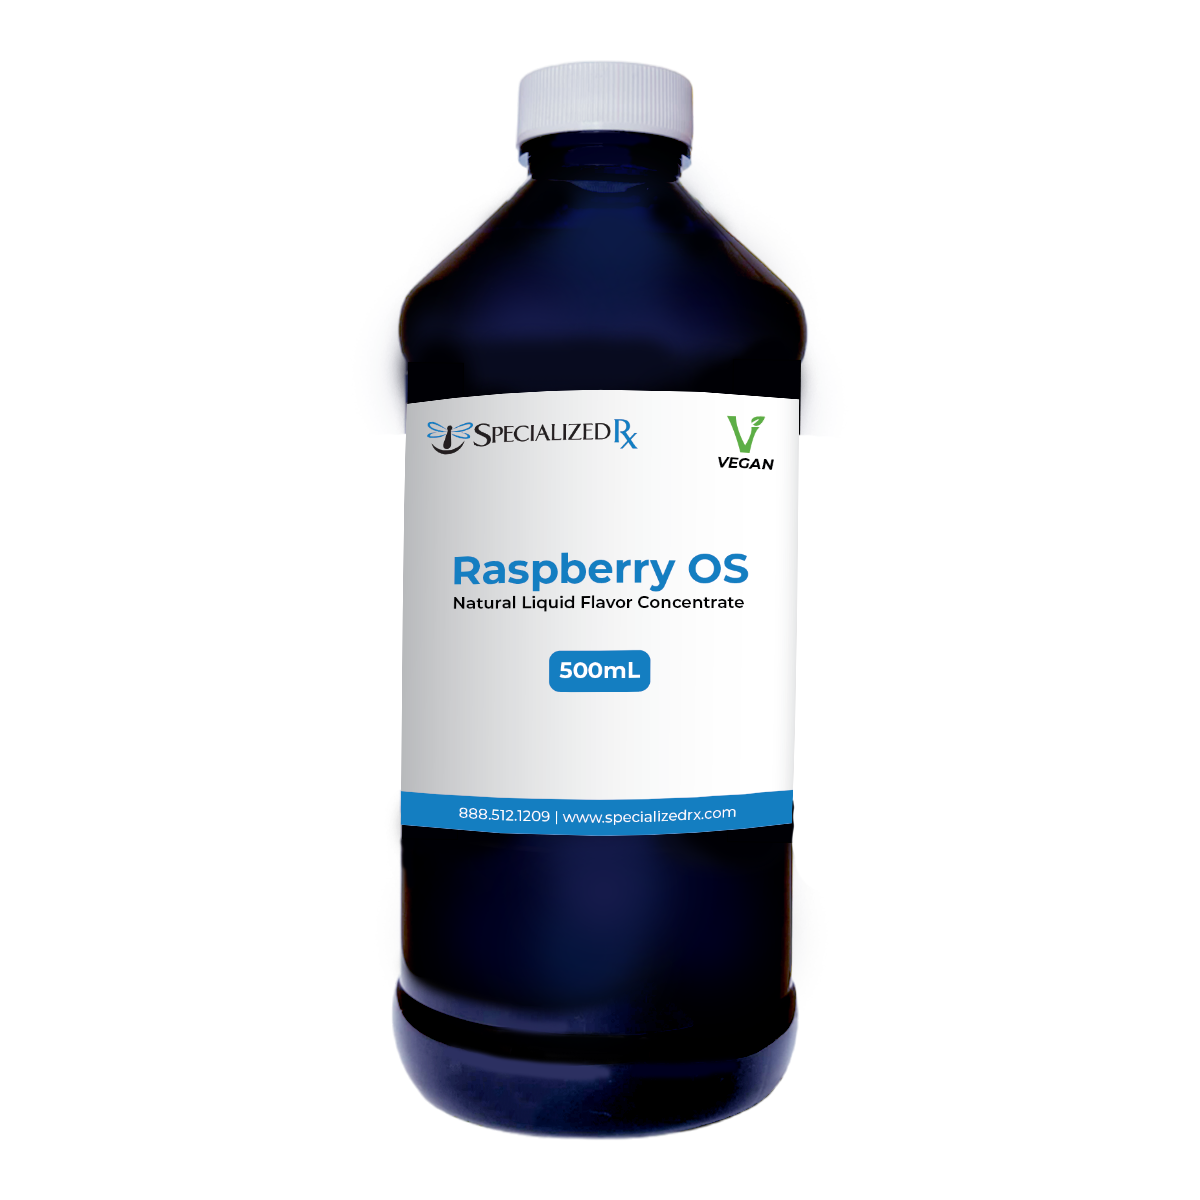 Raspberry OS Natural Organic Liquid Flavor Concentrate